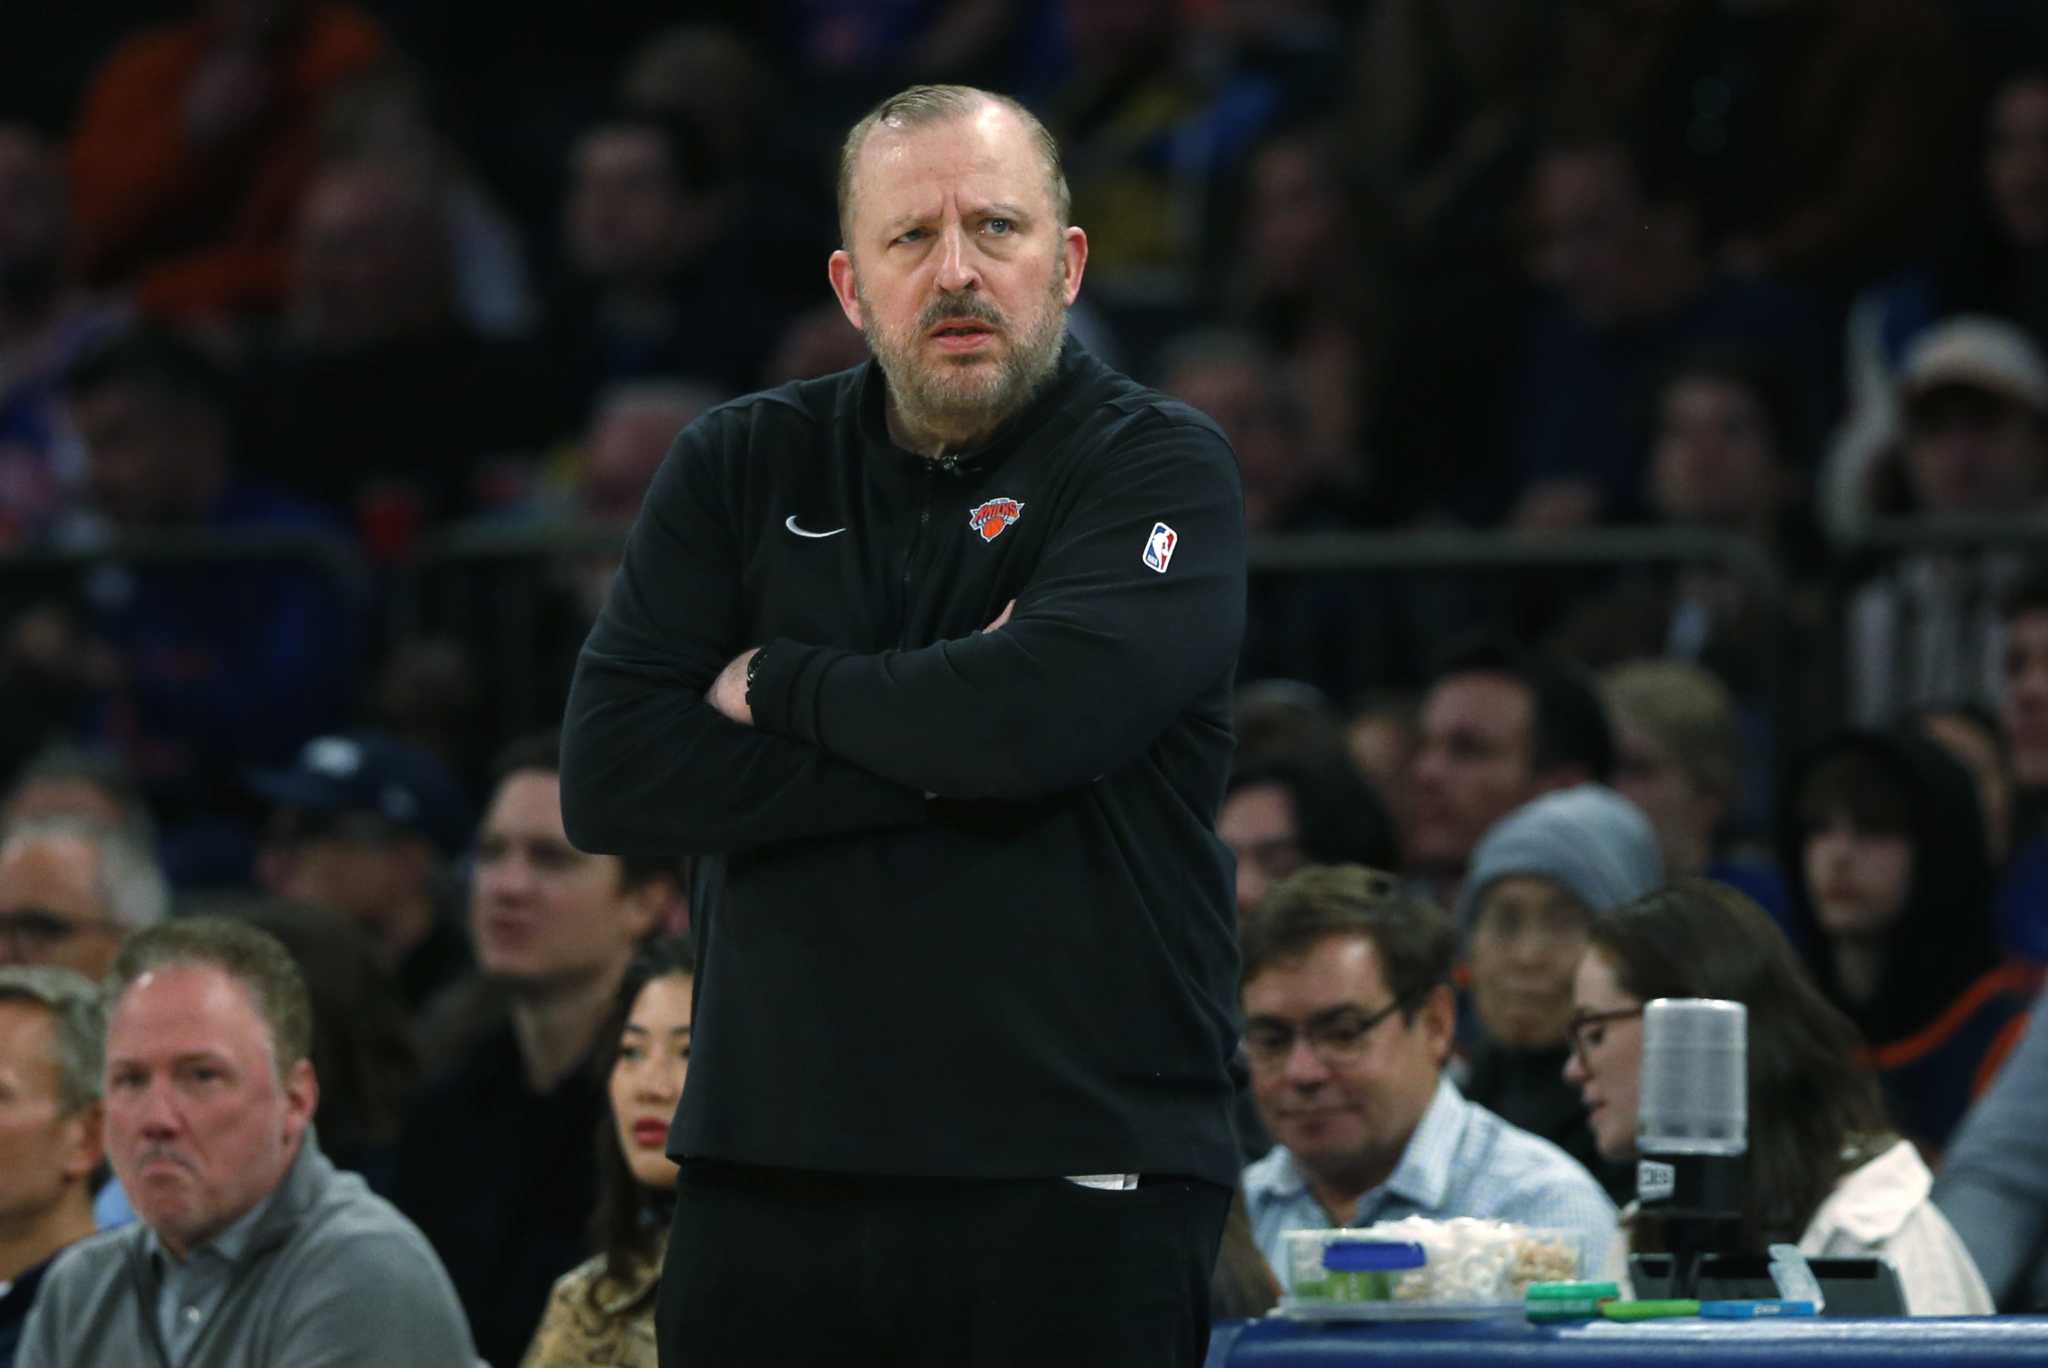 New York Knicks to give CT native Tom Thibodeau a contract extension, according to reports